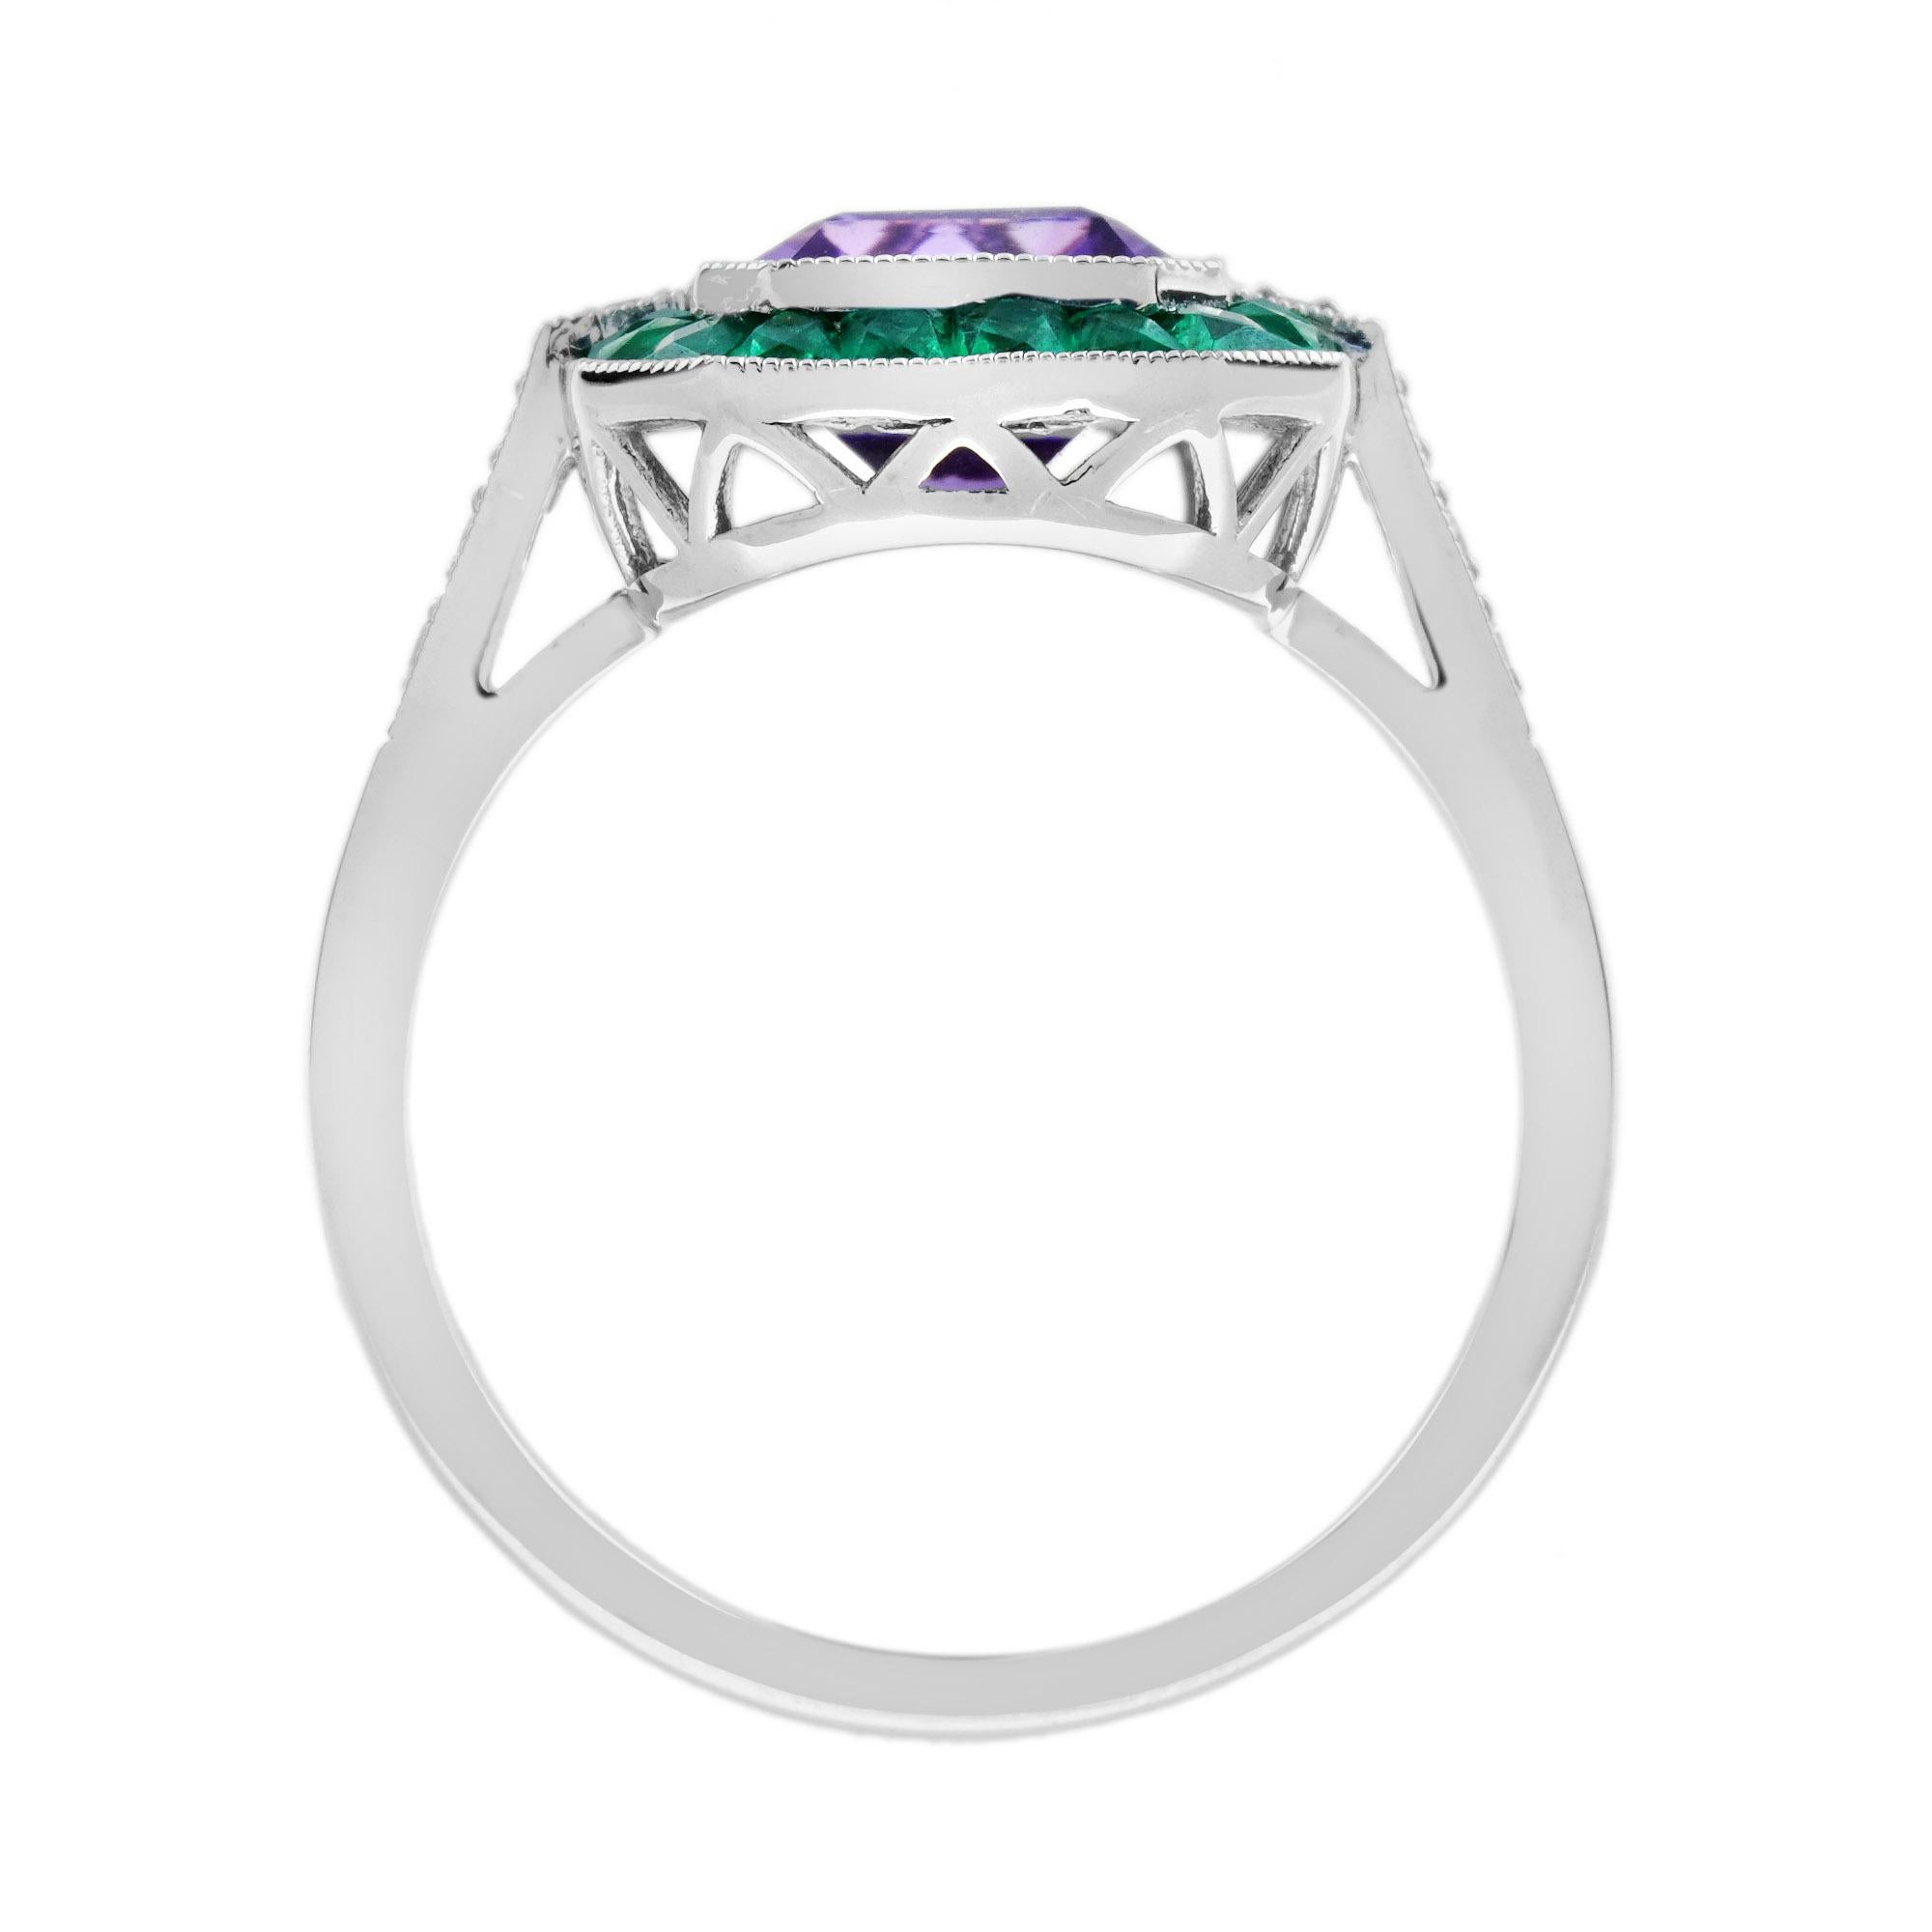 For Sale:  Emerald Cut Amethyst Emerald and Diamond Art Deco Style Ring in 14K White Gold 6